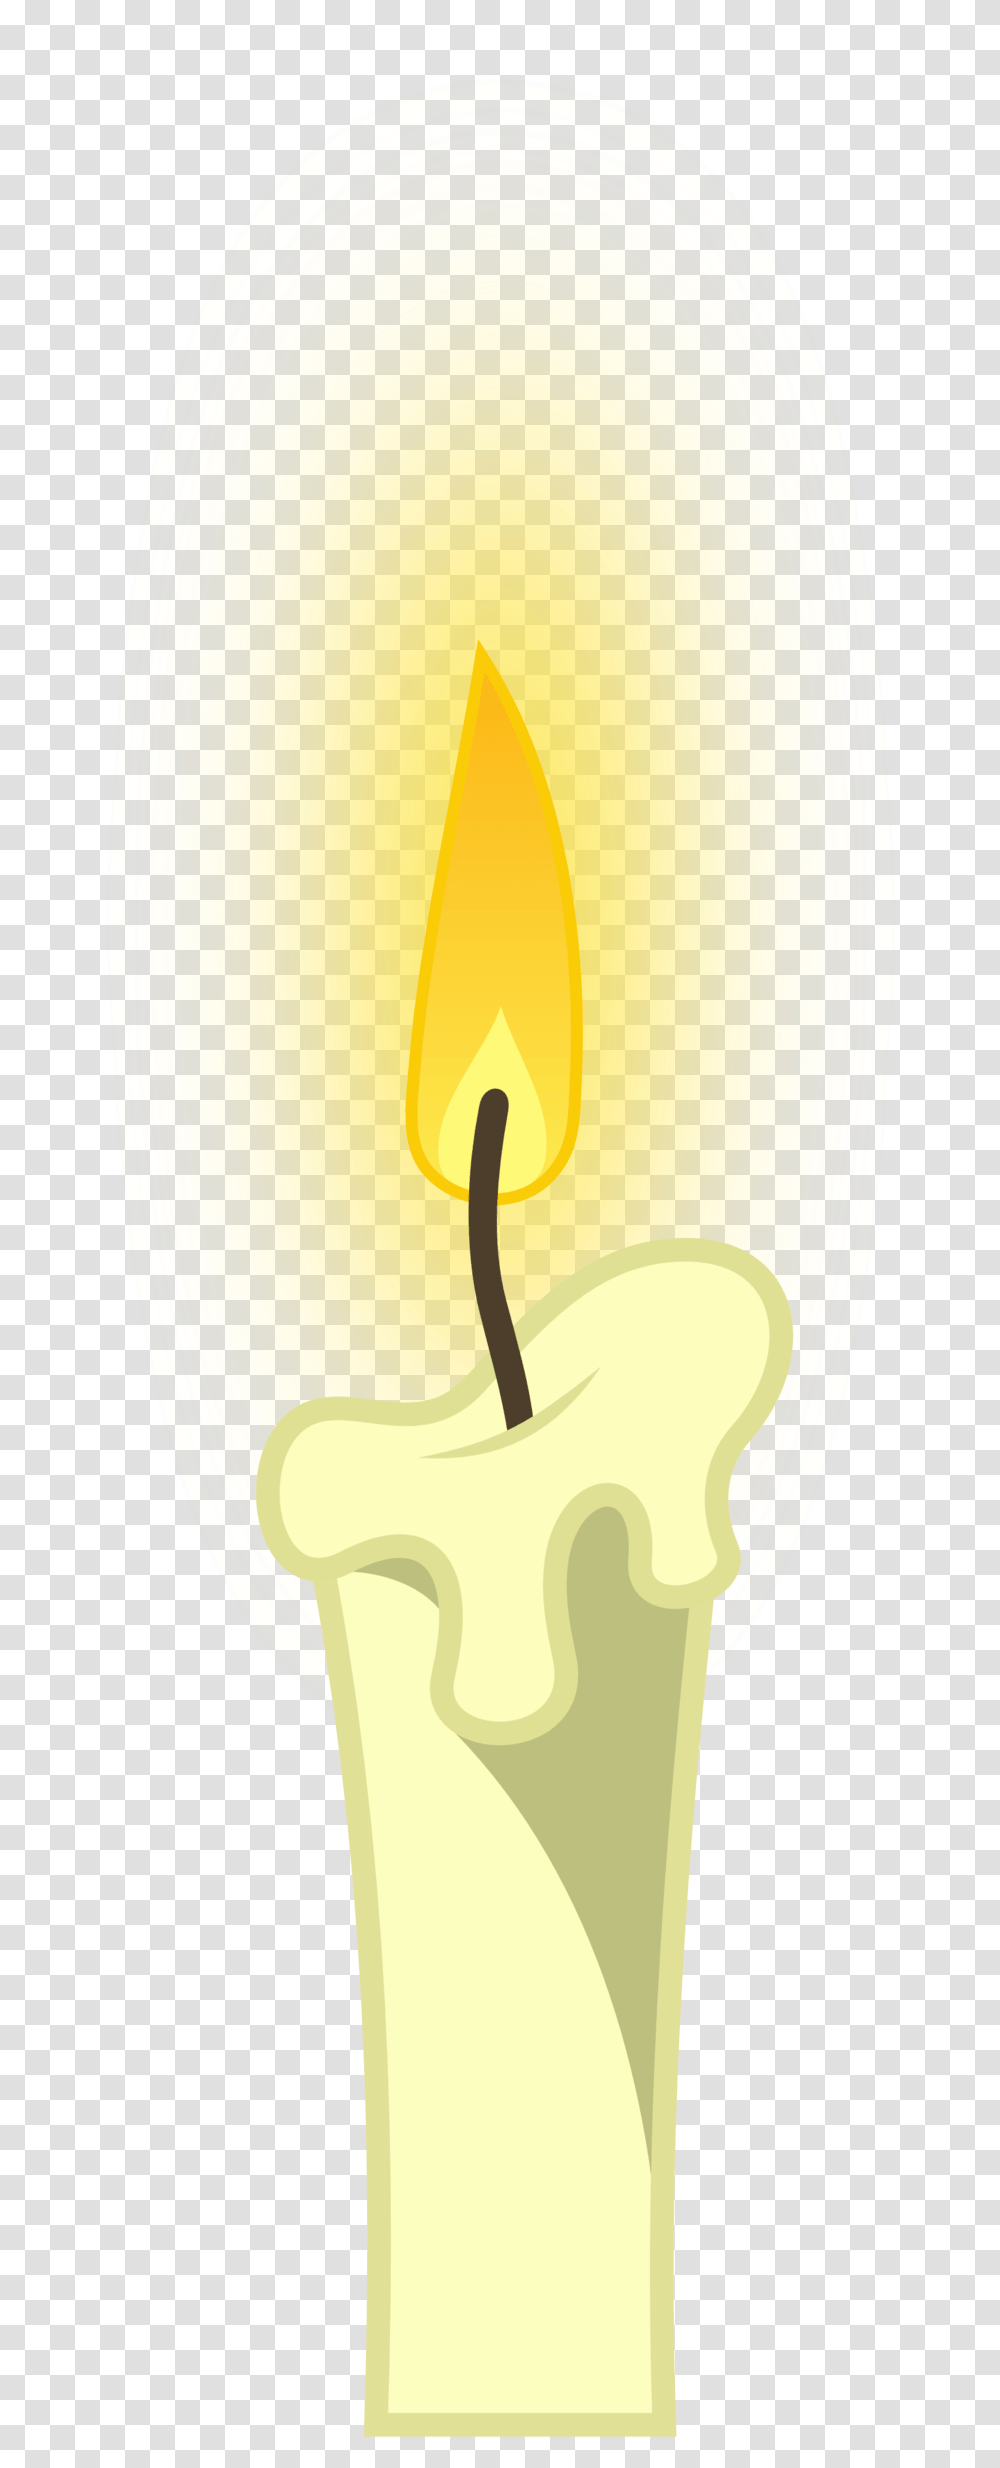 Candle Vector Cartoon White Candle Cartoon, Plant, Hip, Glass, Goblet Transparent Png